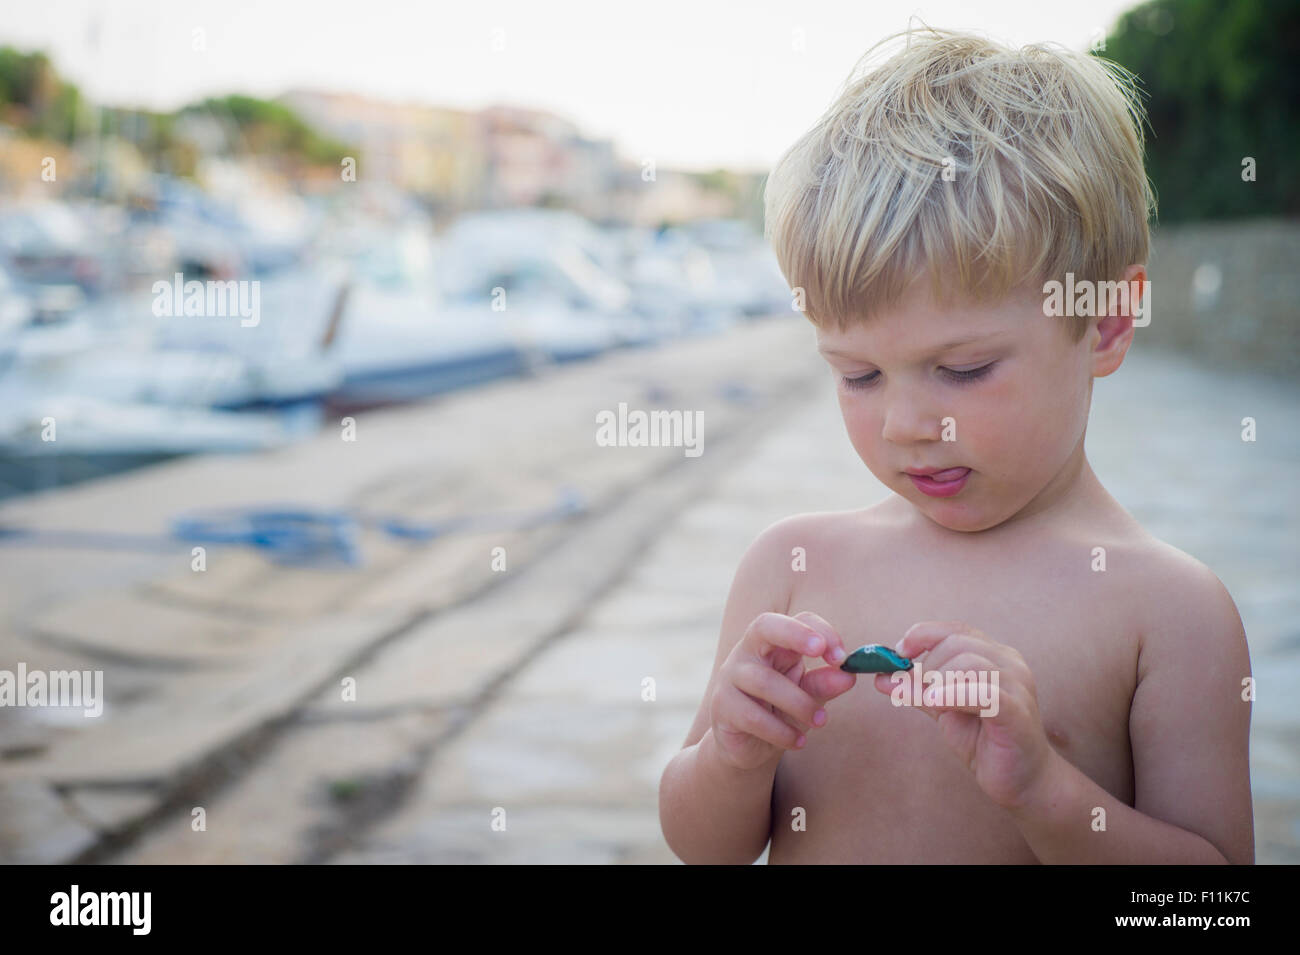 Curious Caucasian boy playing with rock Stock Photo